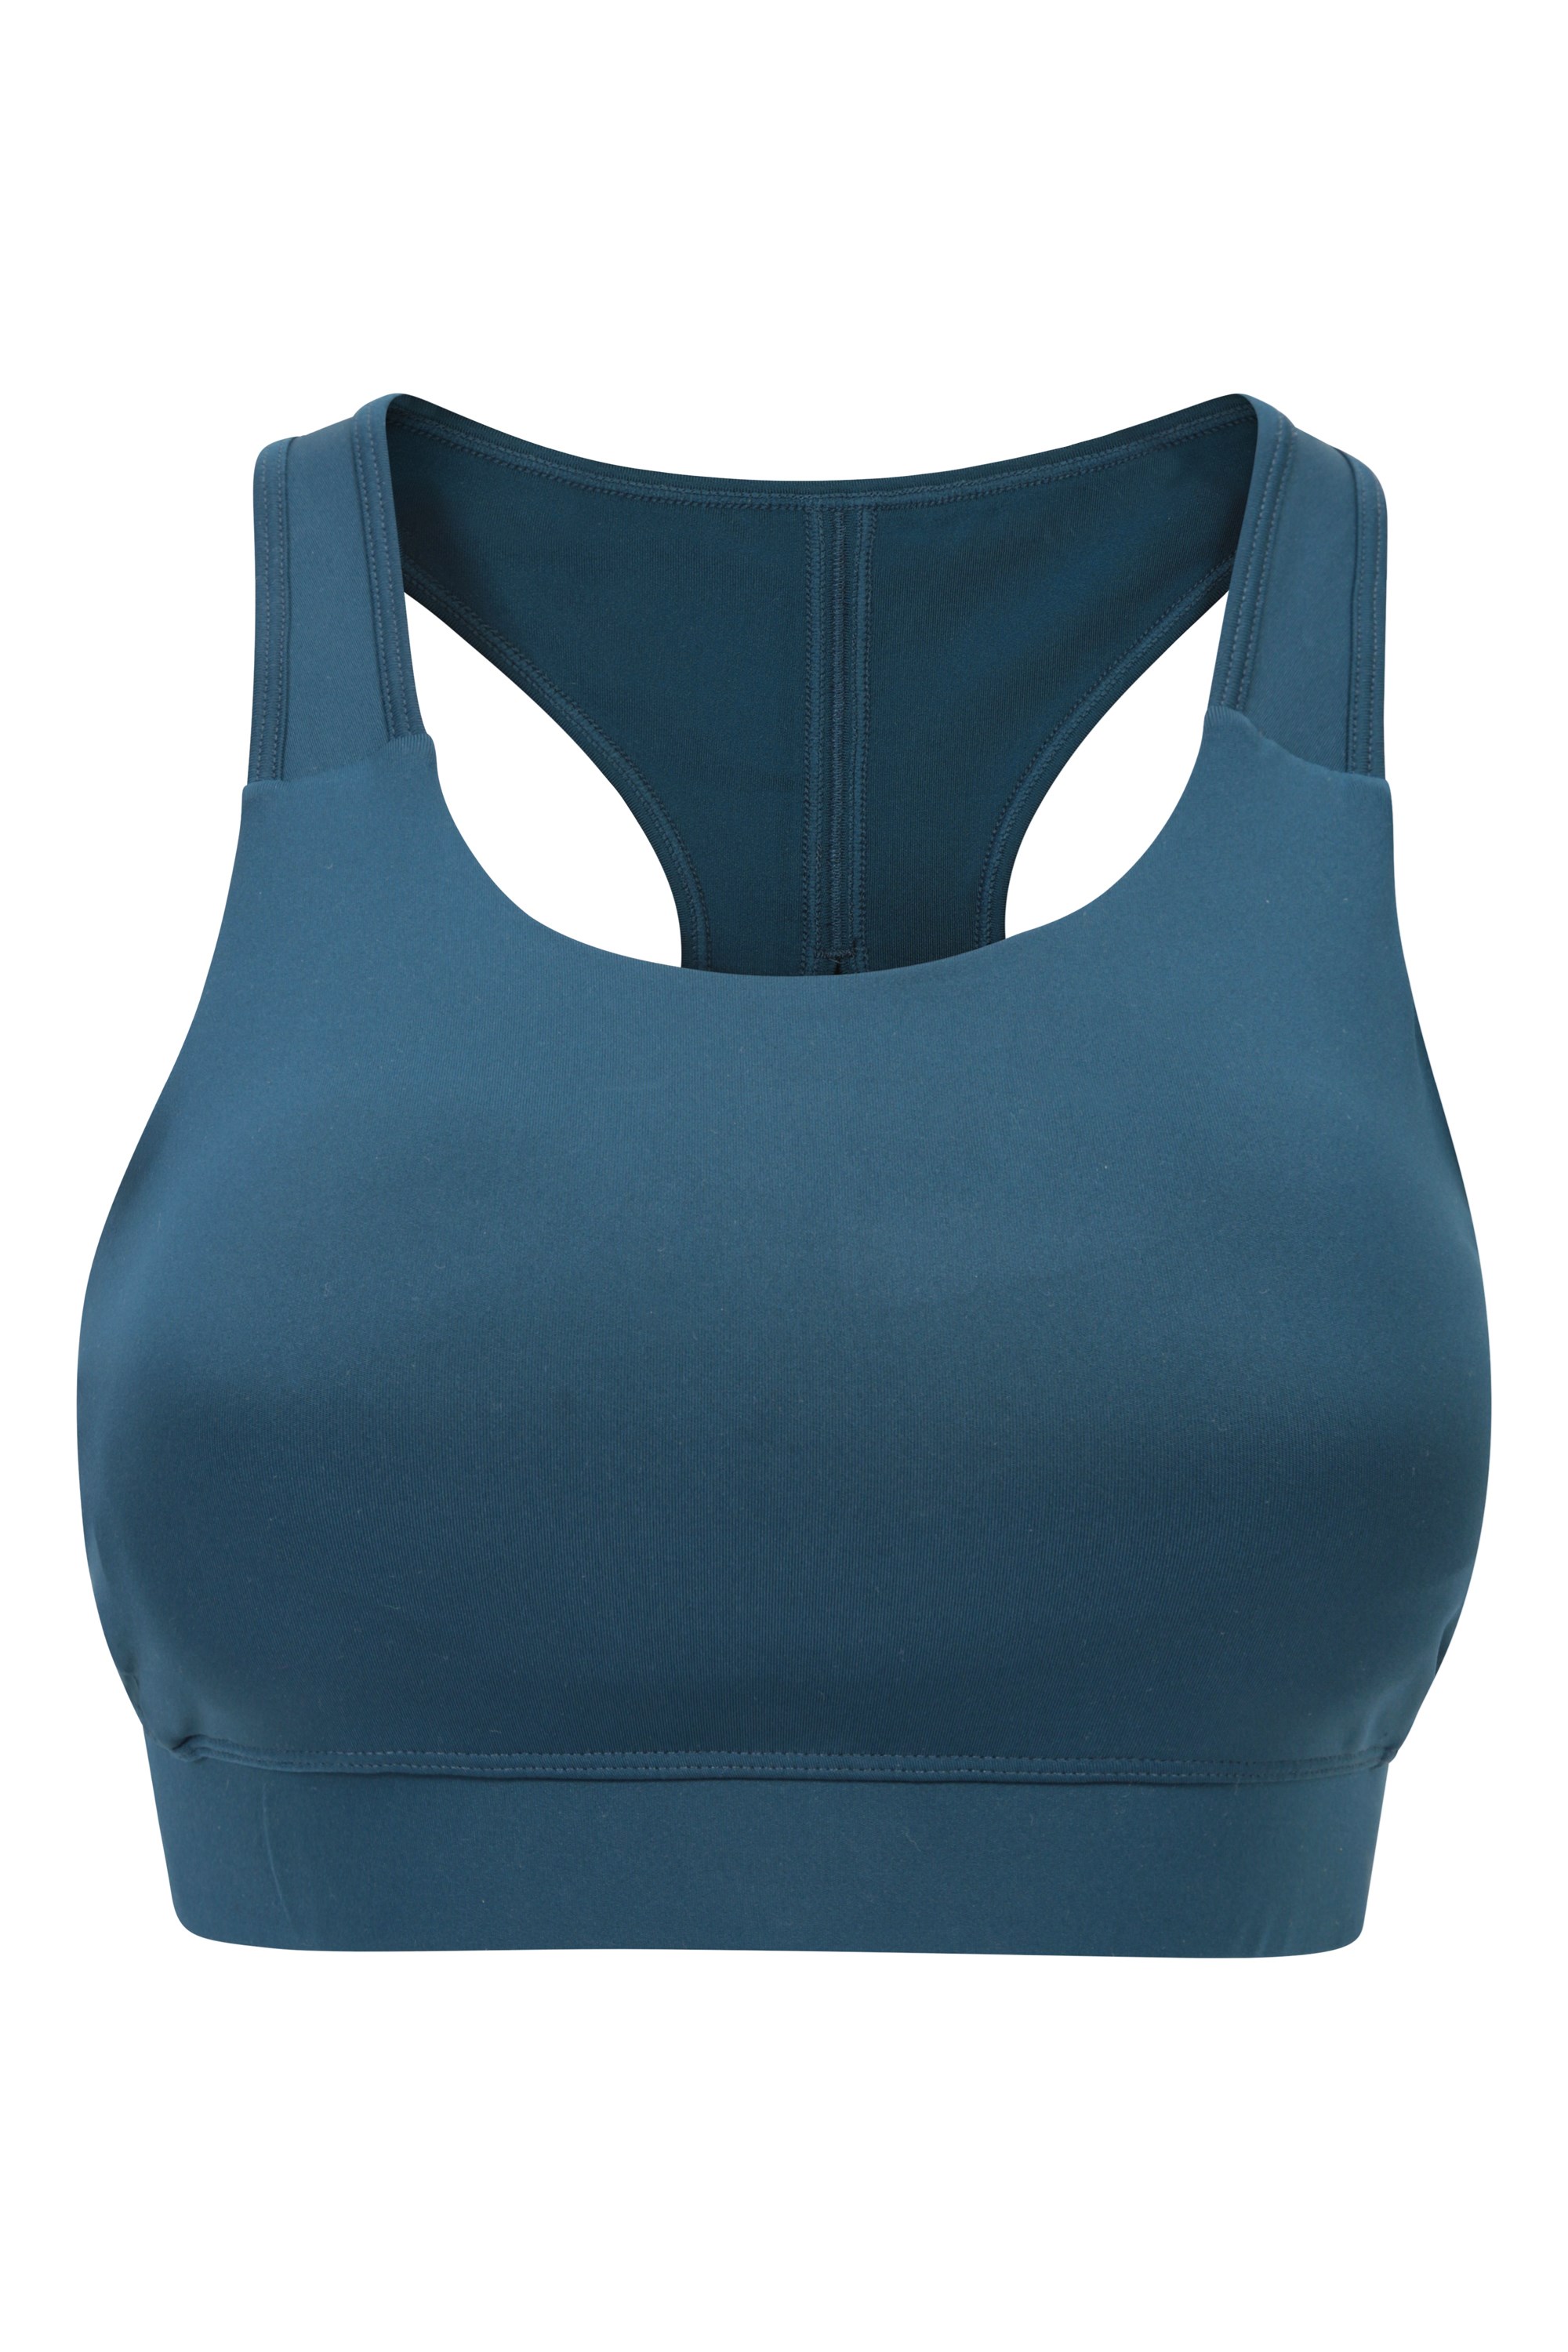 Mountain Warehouse Recycled Womens Sports Bra - Running, Cycling Navy 2 at   Women's Clothing store